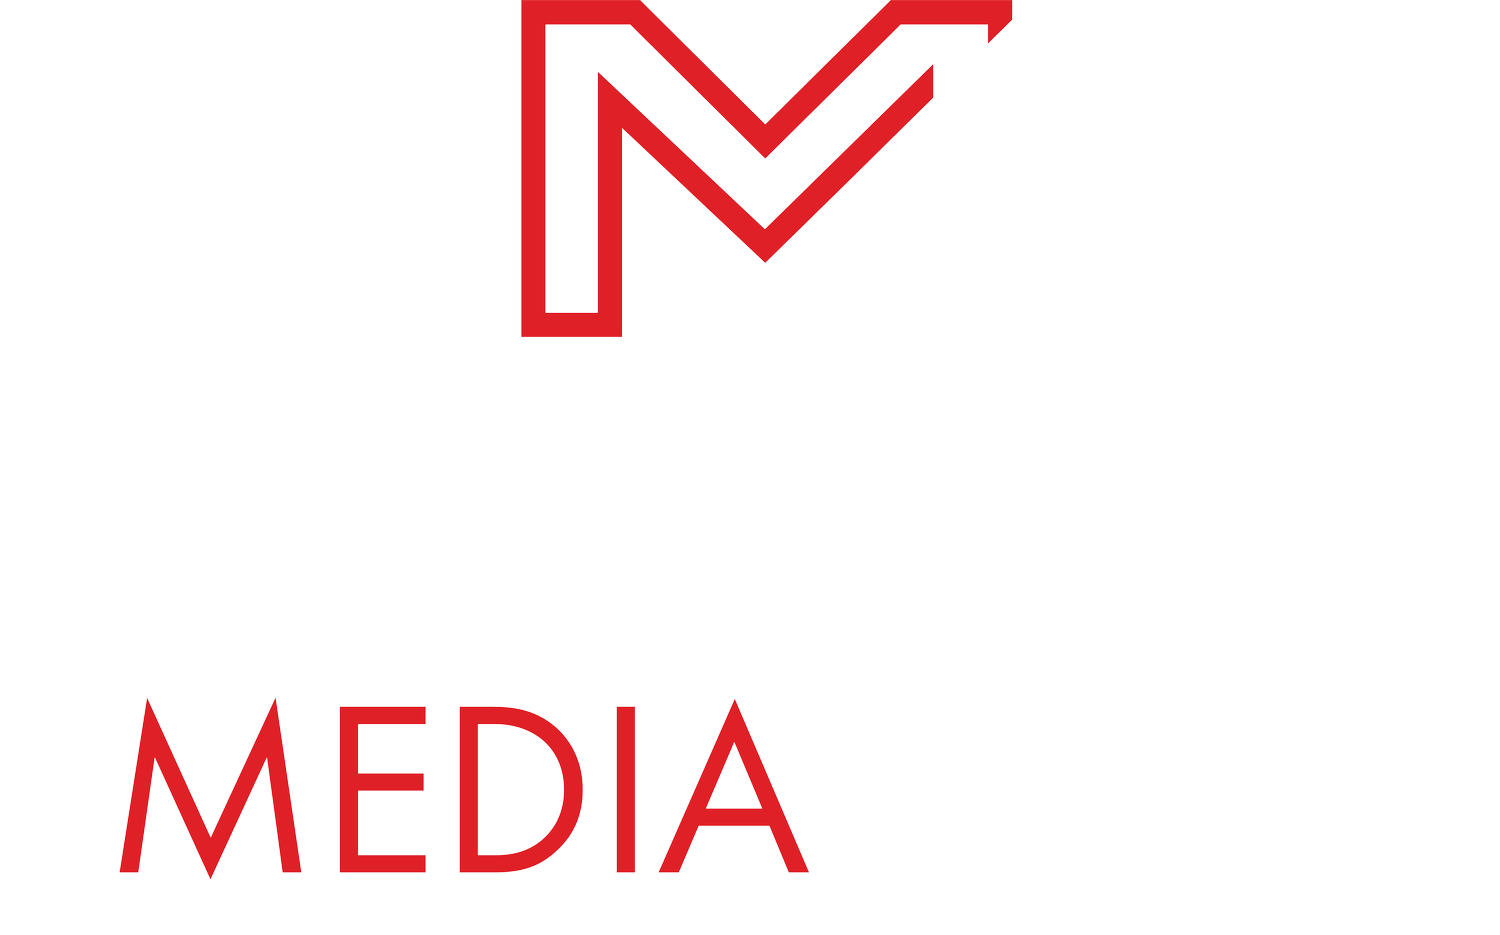 The Media Joint